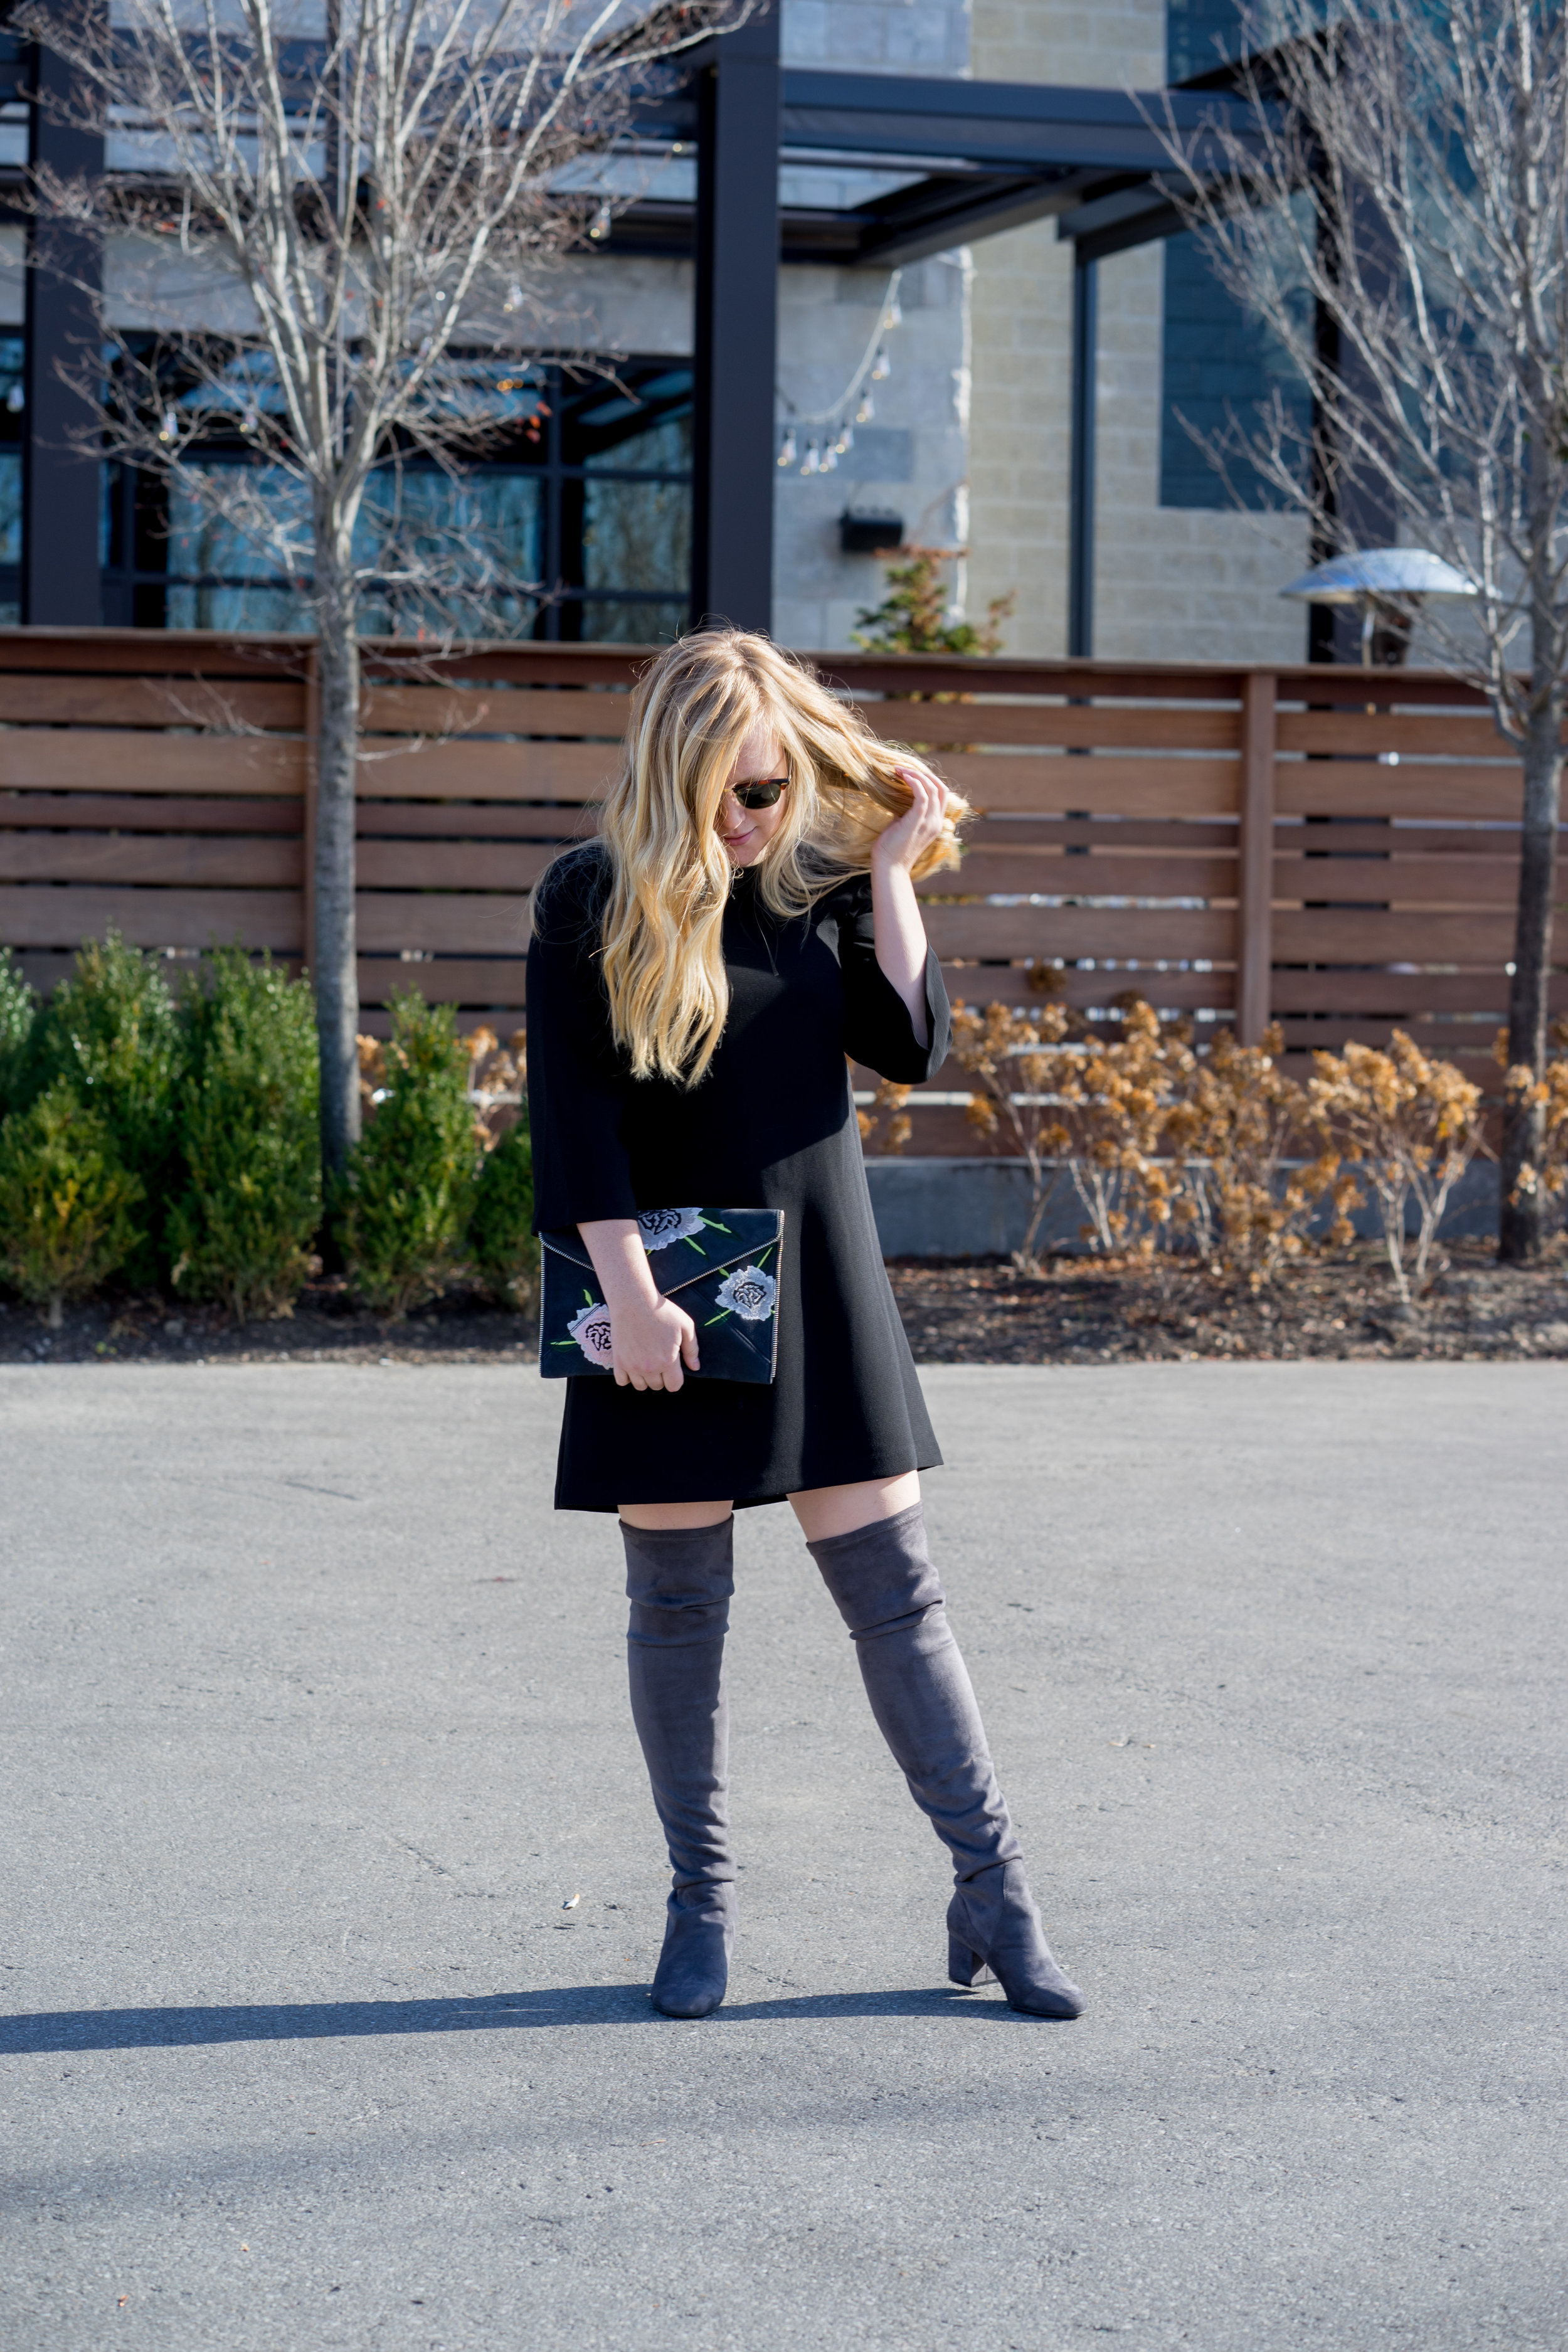 Maggie a la Mode - Steve Madden Isaac Over the Knee Boots, BCBGeneration Black Shift dress, Rebecca Minkoff Leo Nubuck Floral Clutch, Ray Ban Clubmaster sunglasses